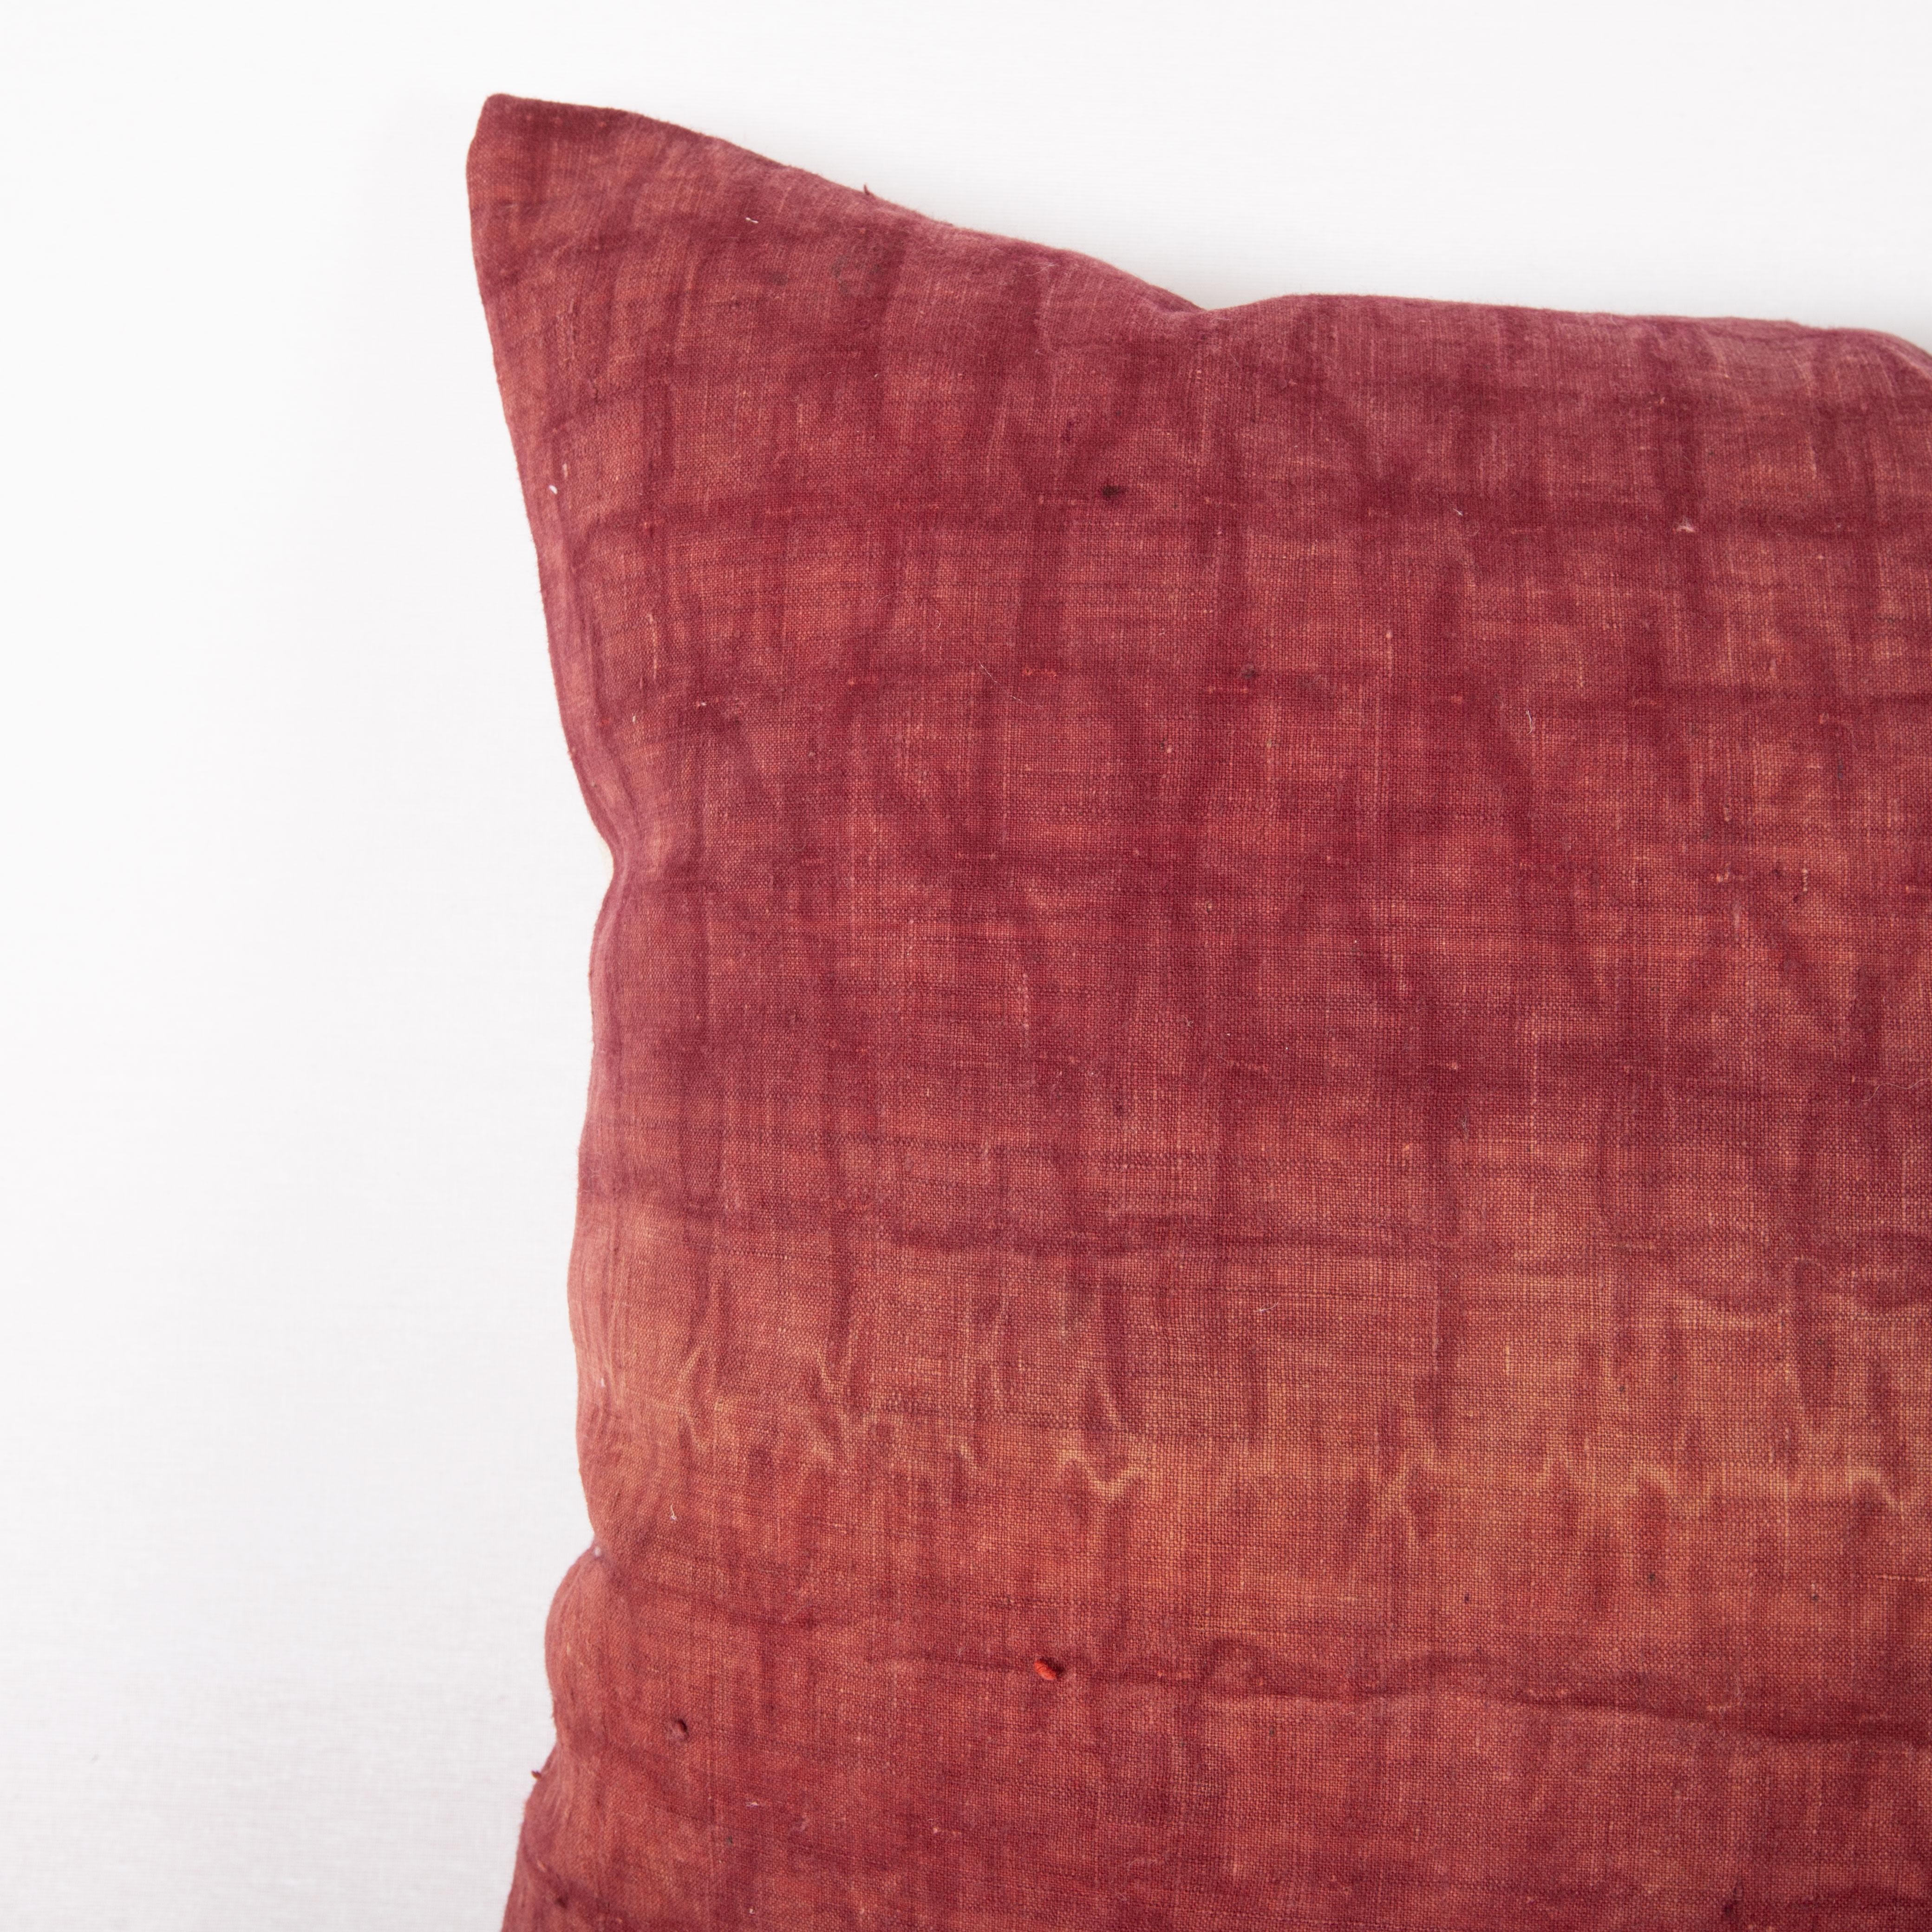 Hand-Woven Madder Red Pillow Cover Made from an Early 20th C. Quilt Top, Turkey For Sale